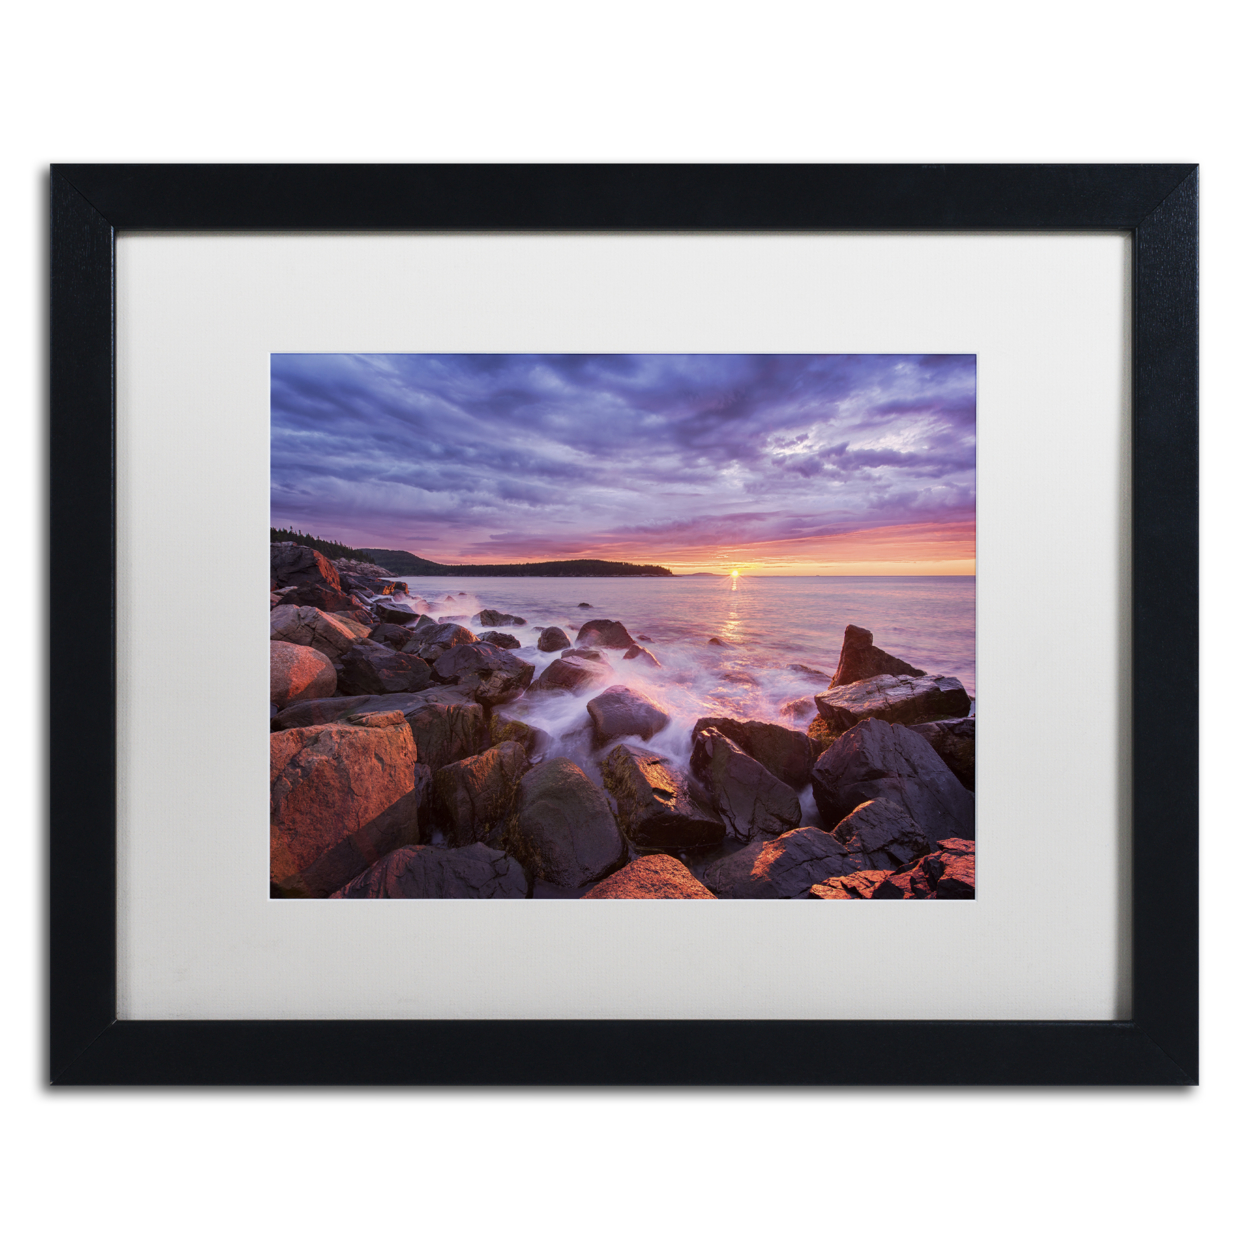 Michael Blanchette Photography 'Acadia Rocks' Black Wooden Framed Art 18 X 22 Inches